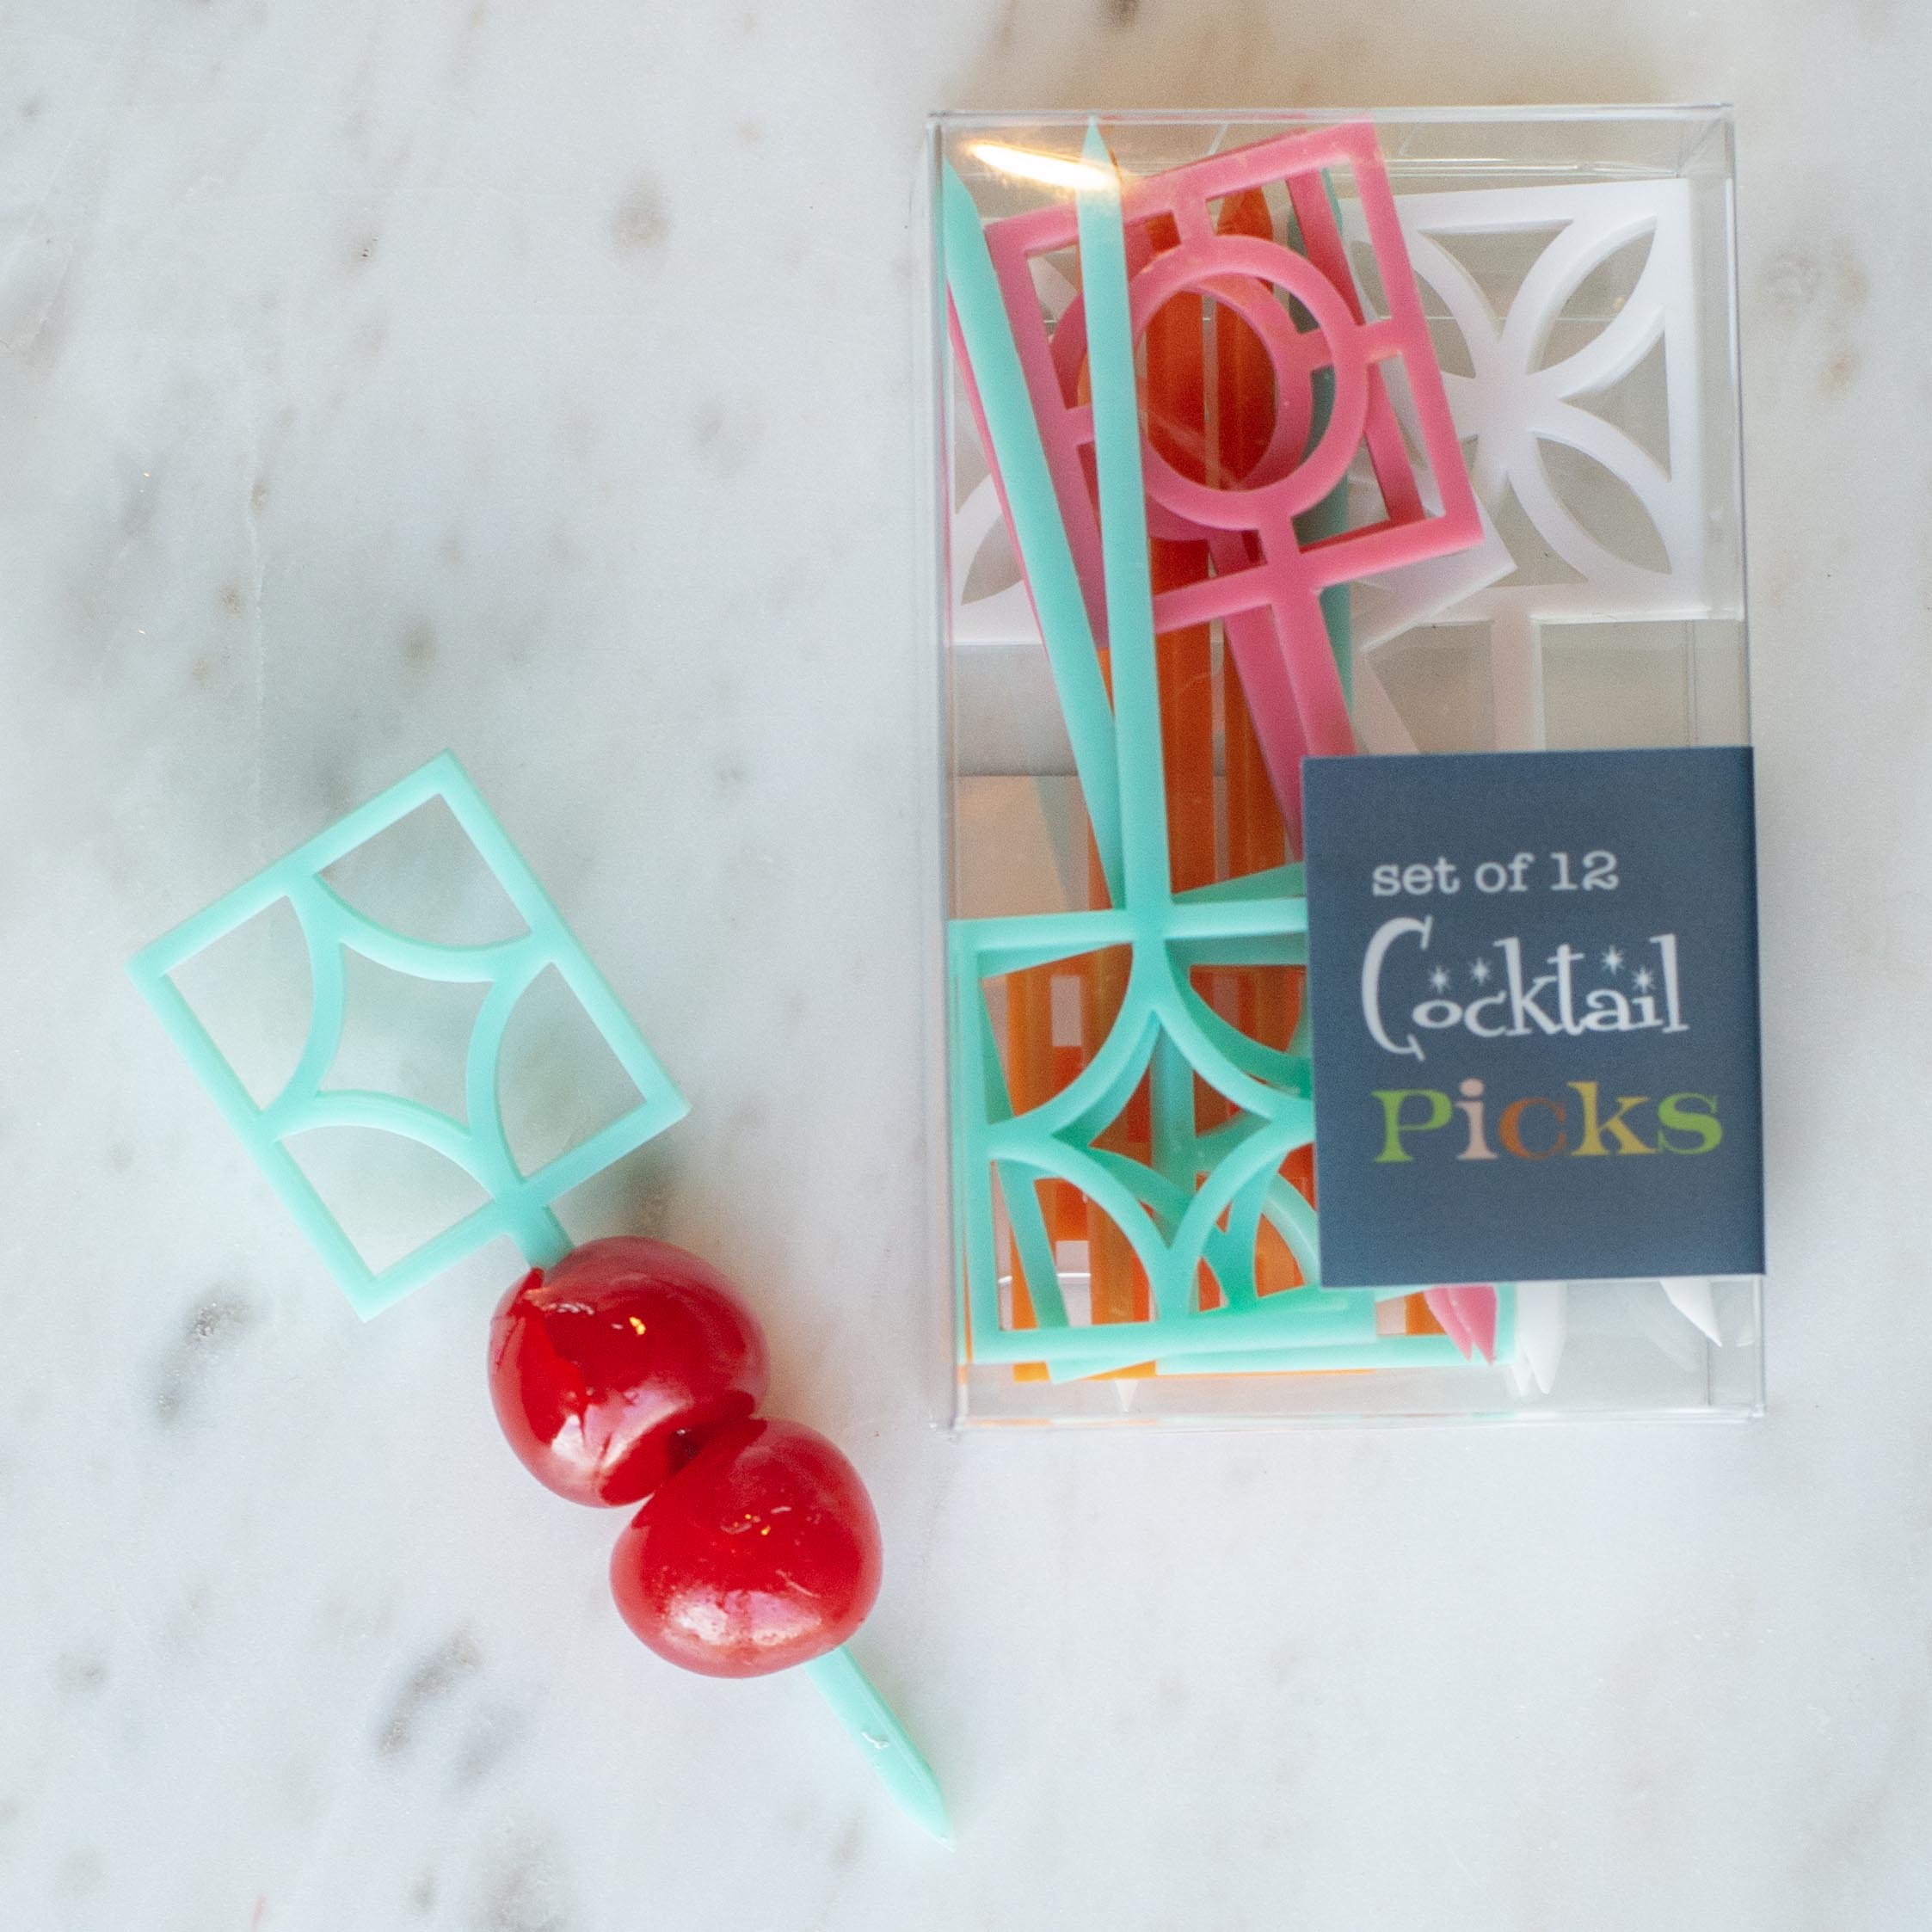 wholesale palm springs inspired breeze block set of 12 acrylic cocktail picks - boxed and ready for gift giving for housewarming or host and hostess gifts